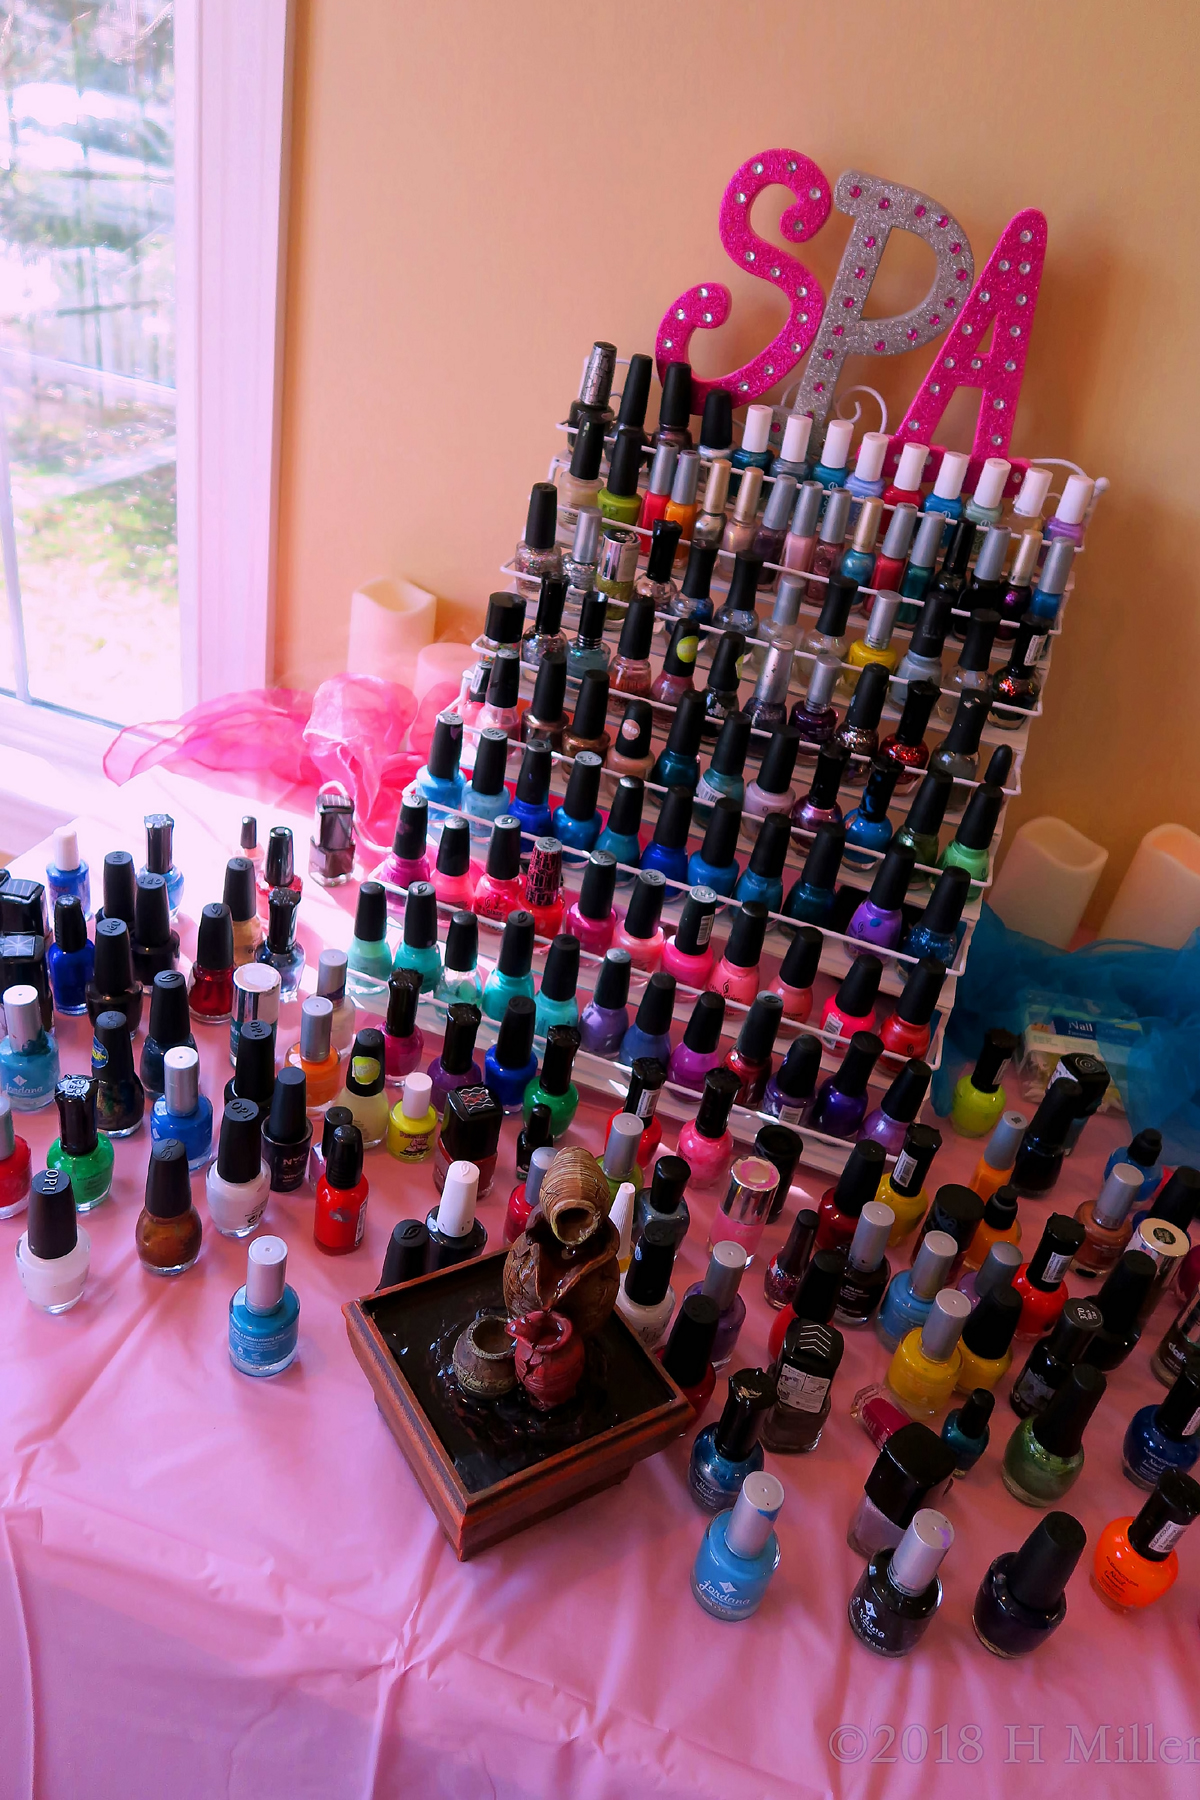 Check Out All The Awesome Girls Nail Polish! 